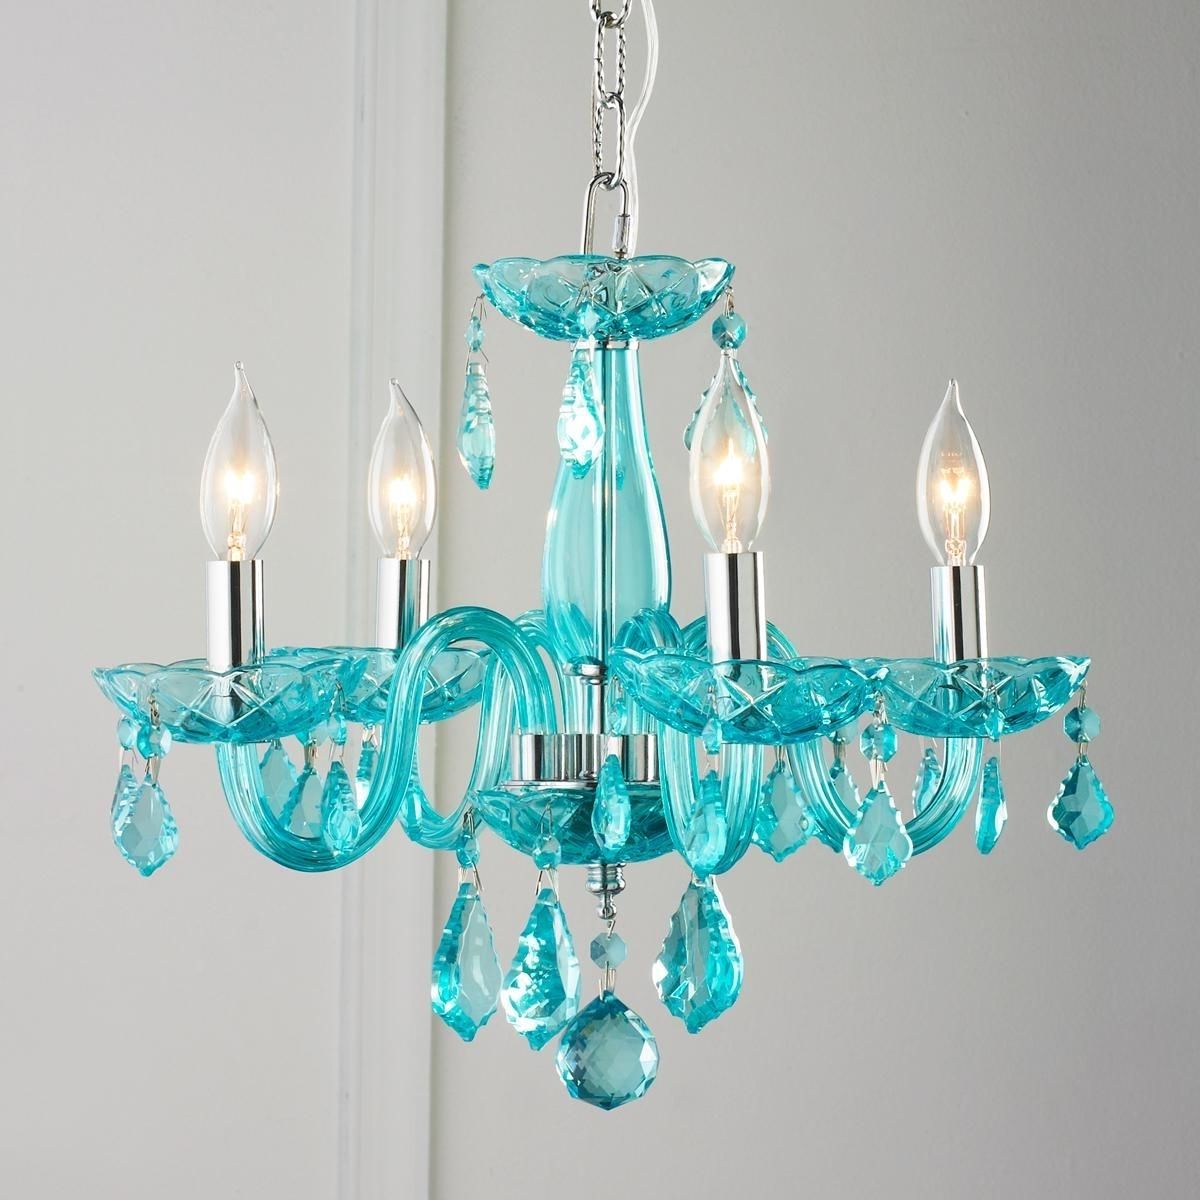 Widely Used Turquoise Color Chandeliers In Color Crystal Mini Chandelier (View 1 of 20)